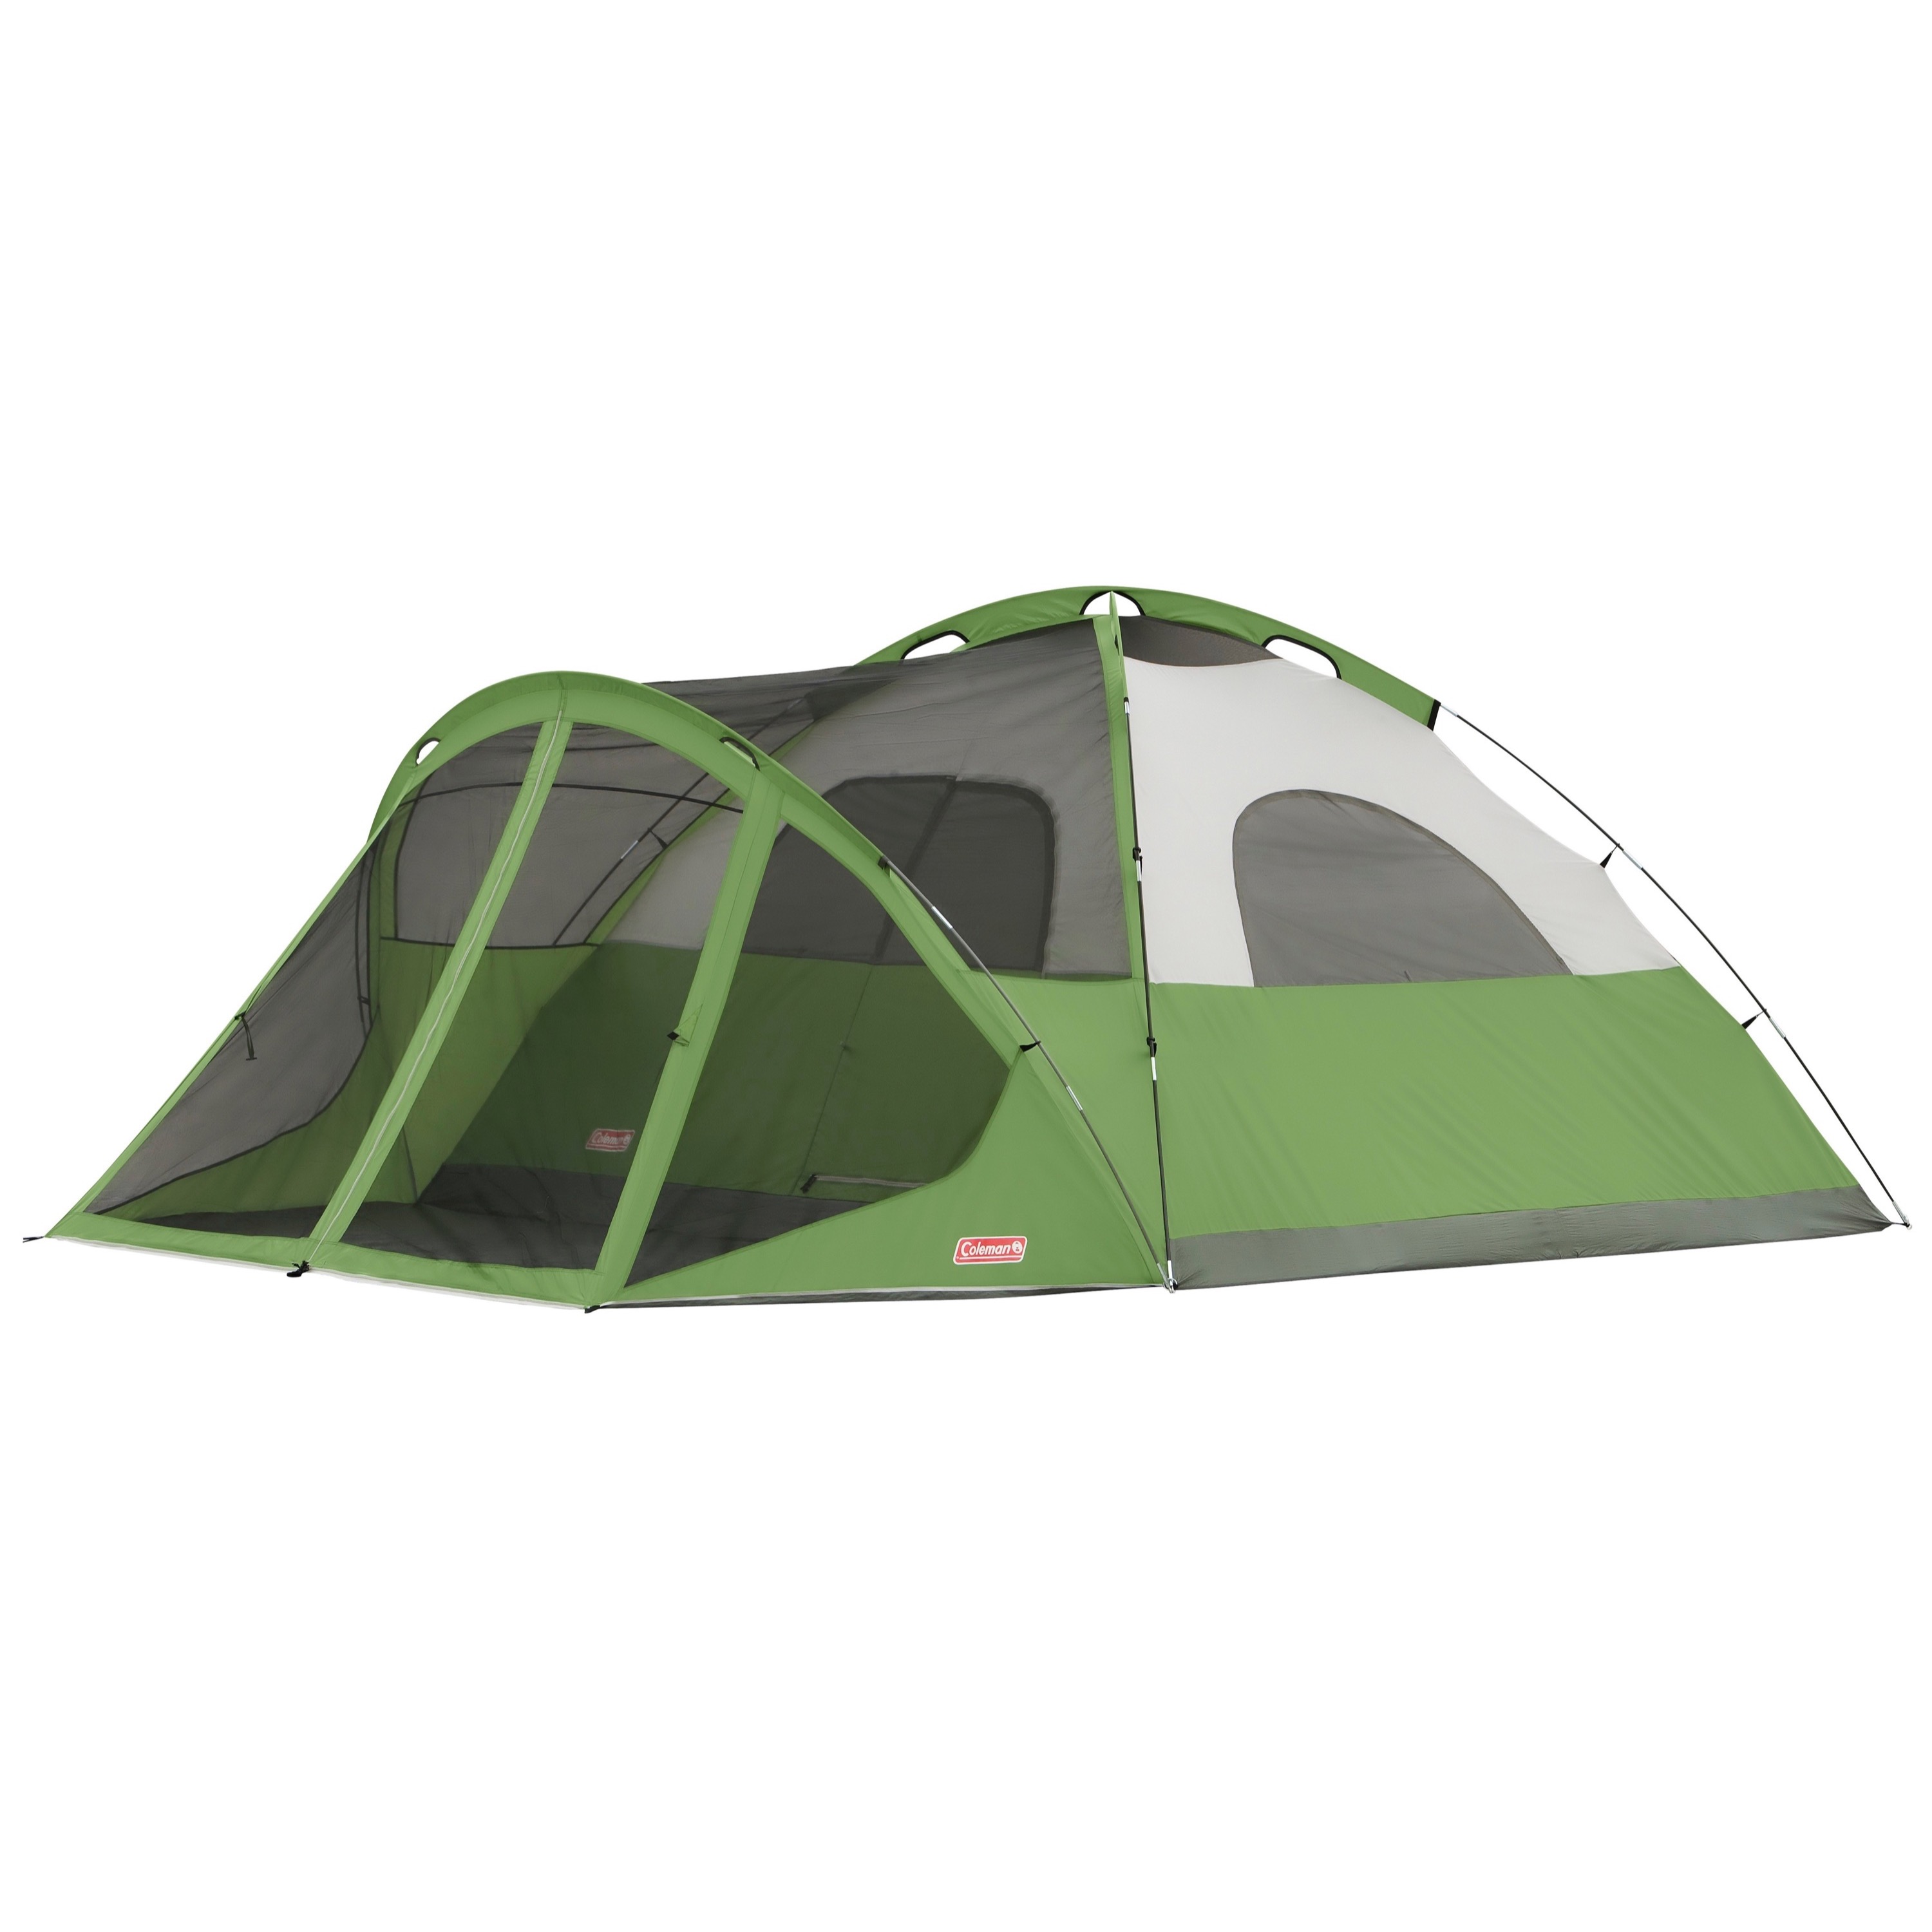 Coleman Evanston 8-Person Tent with Screen Room - image 3 of 5